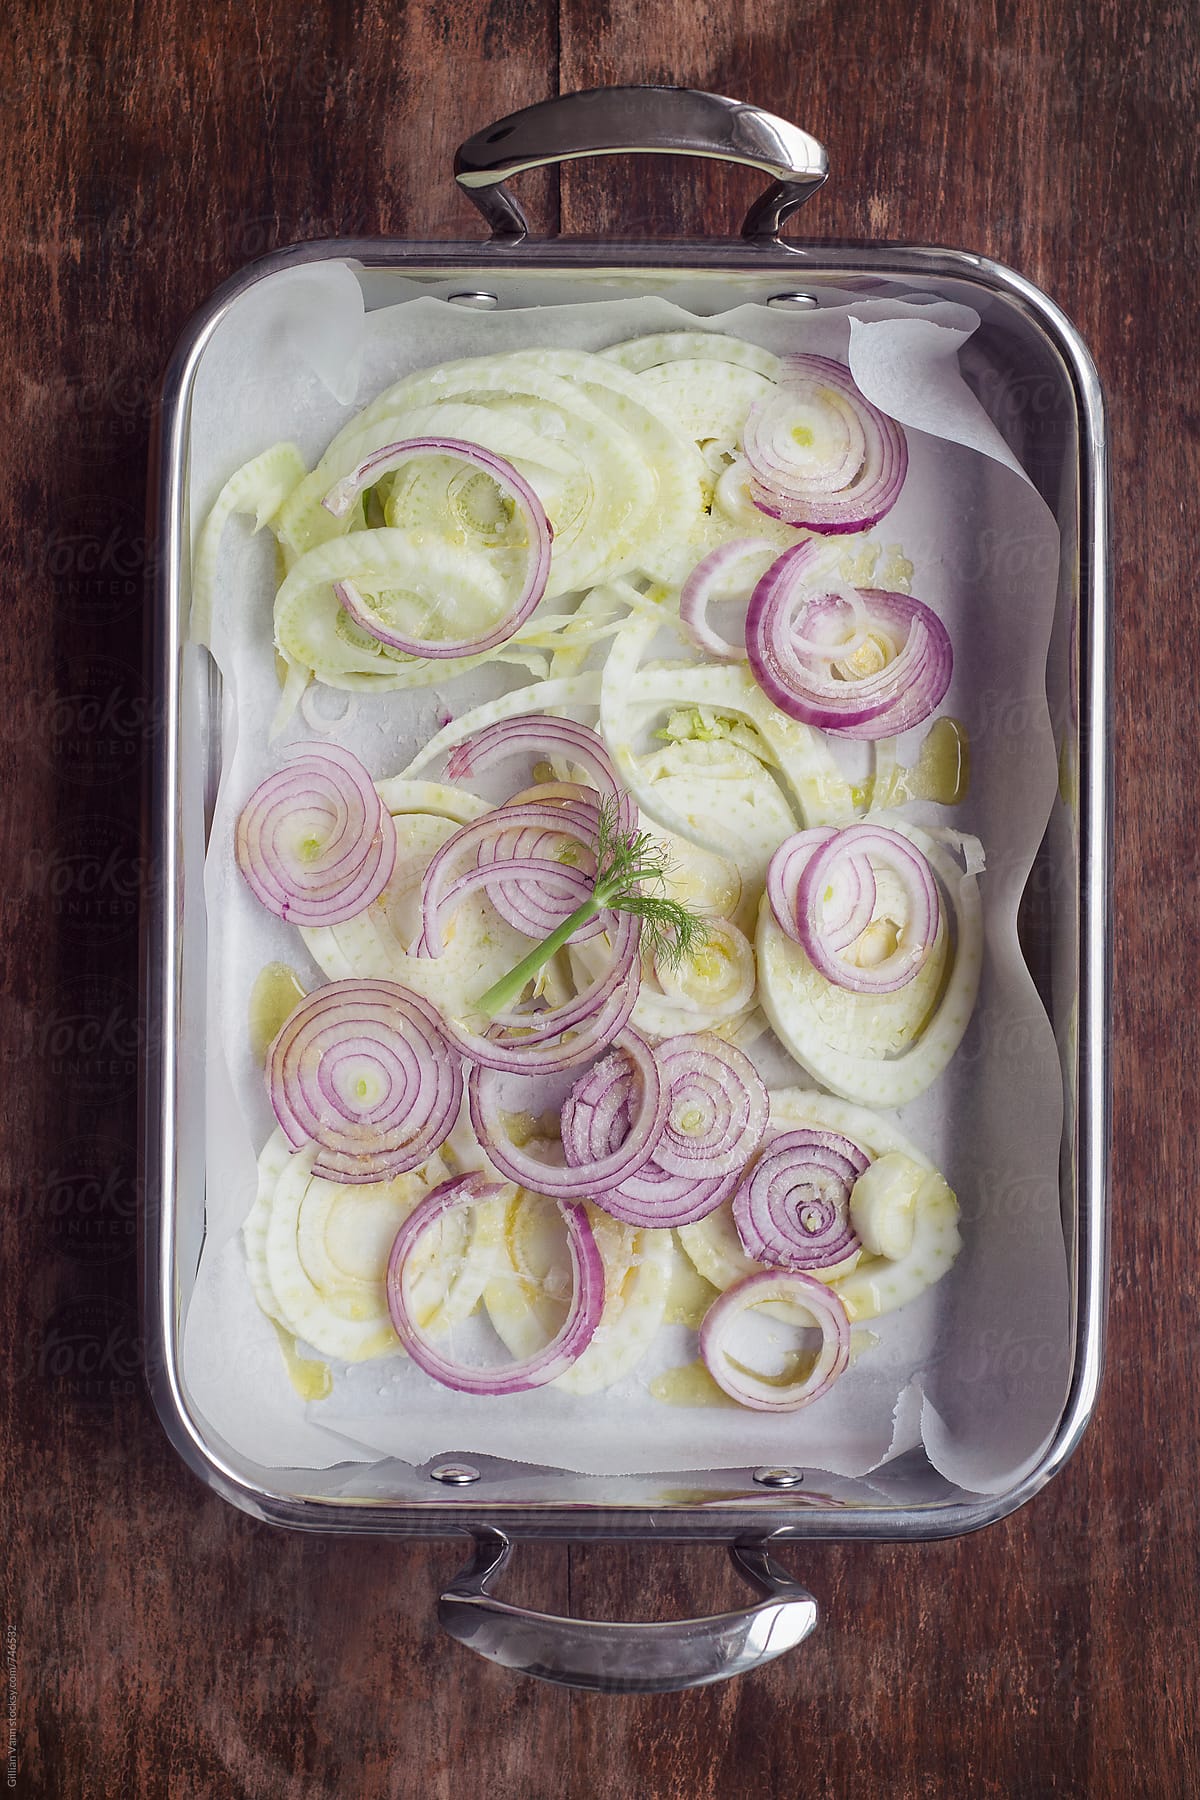 fennel and onion